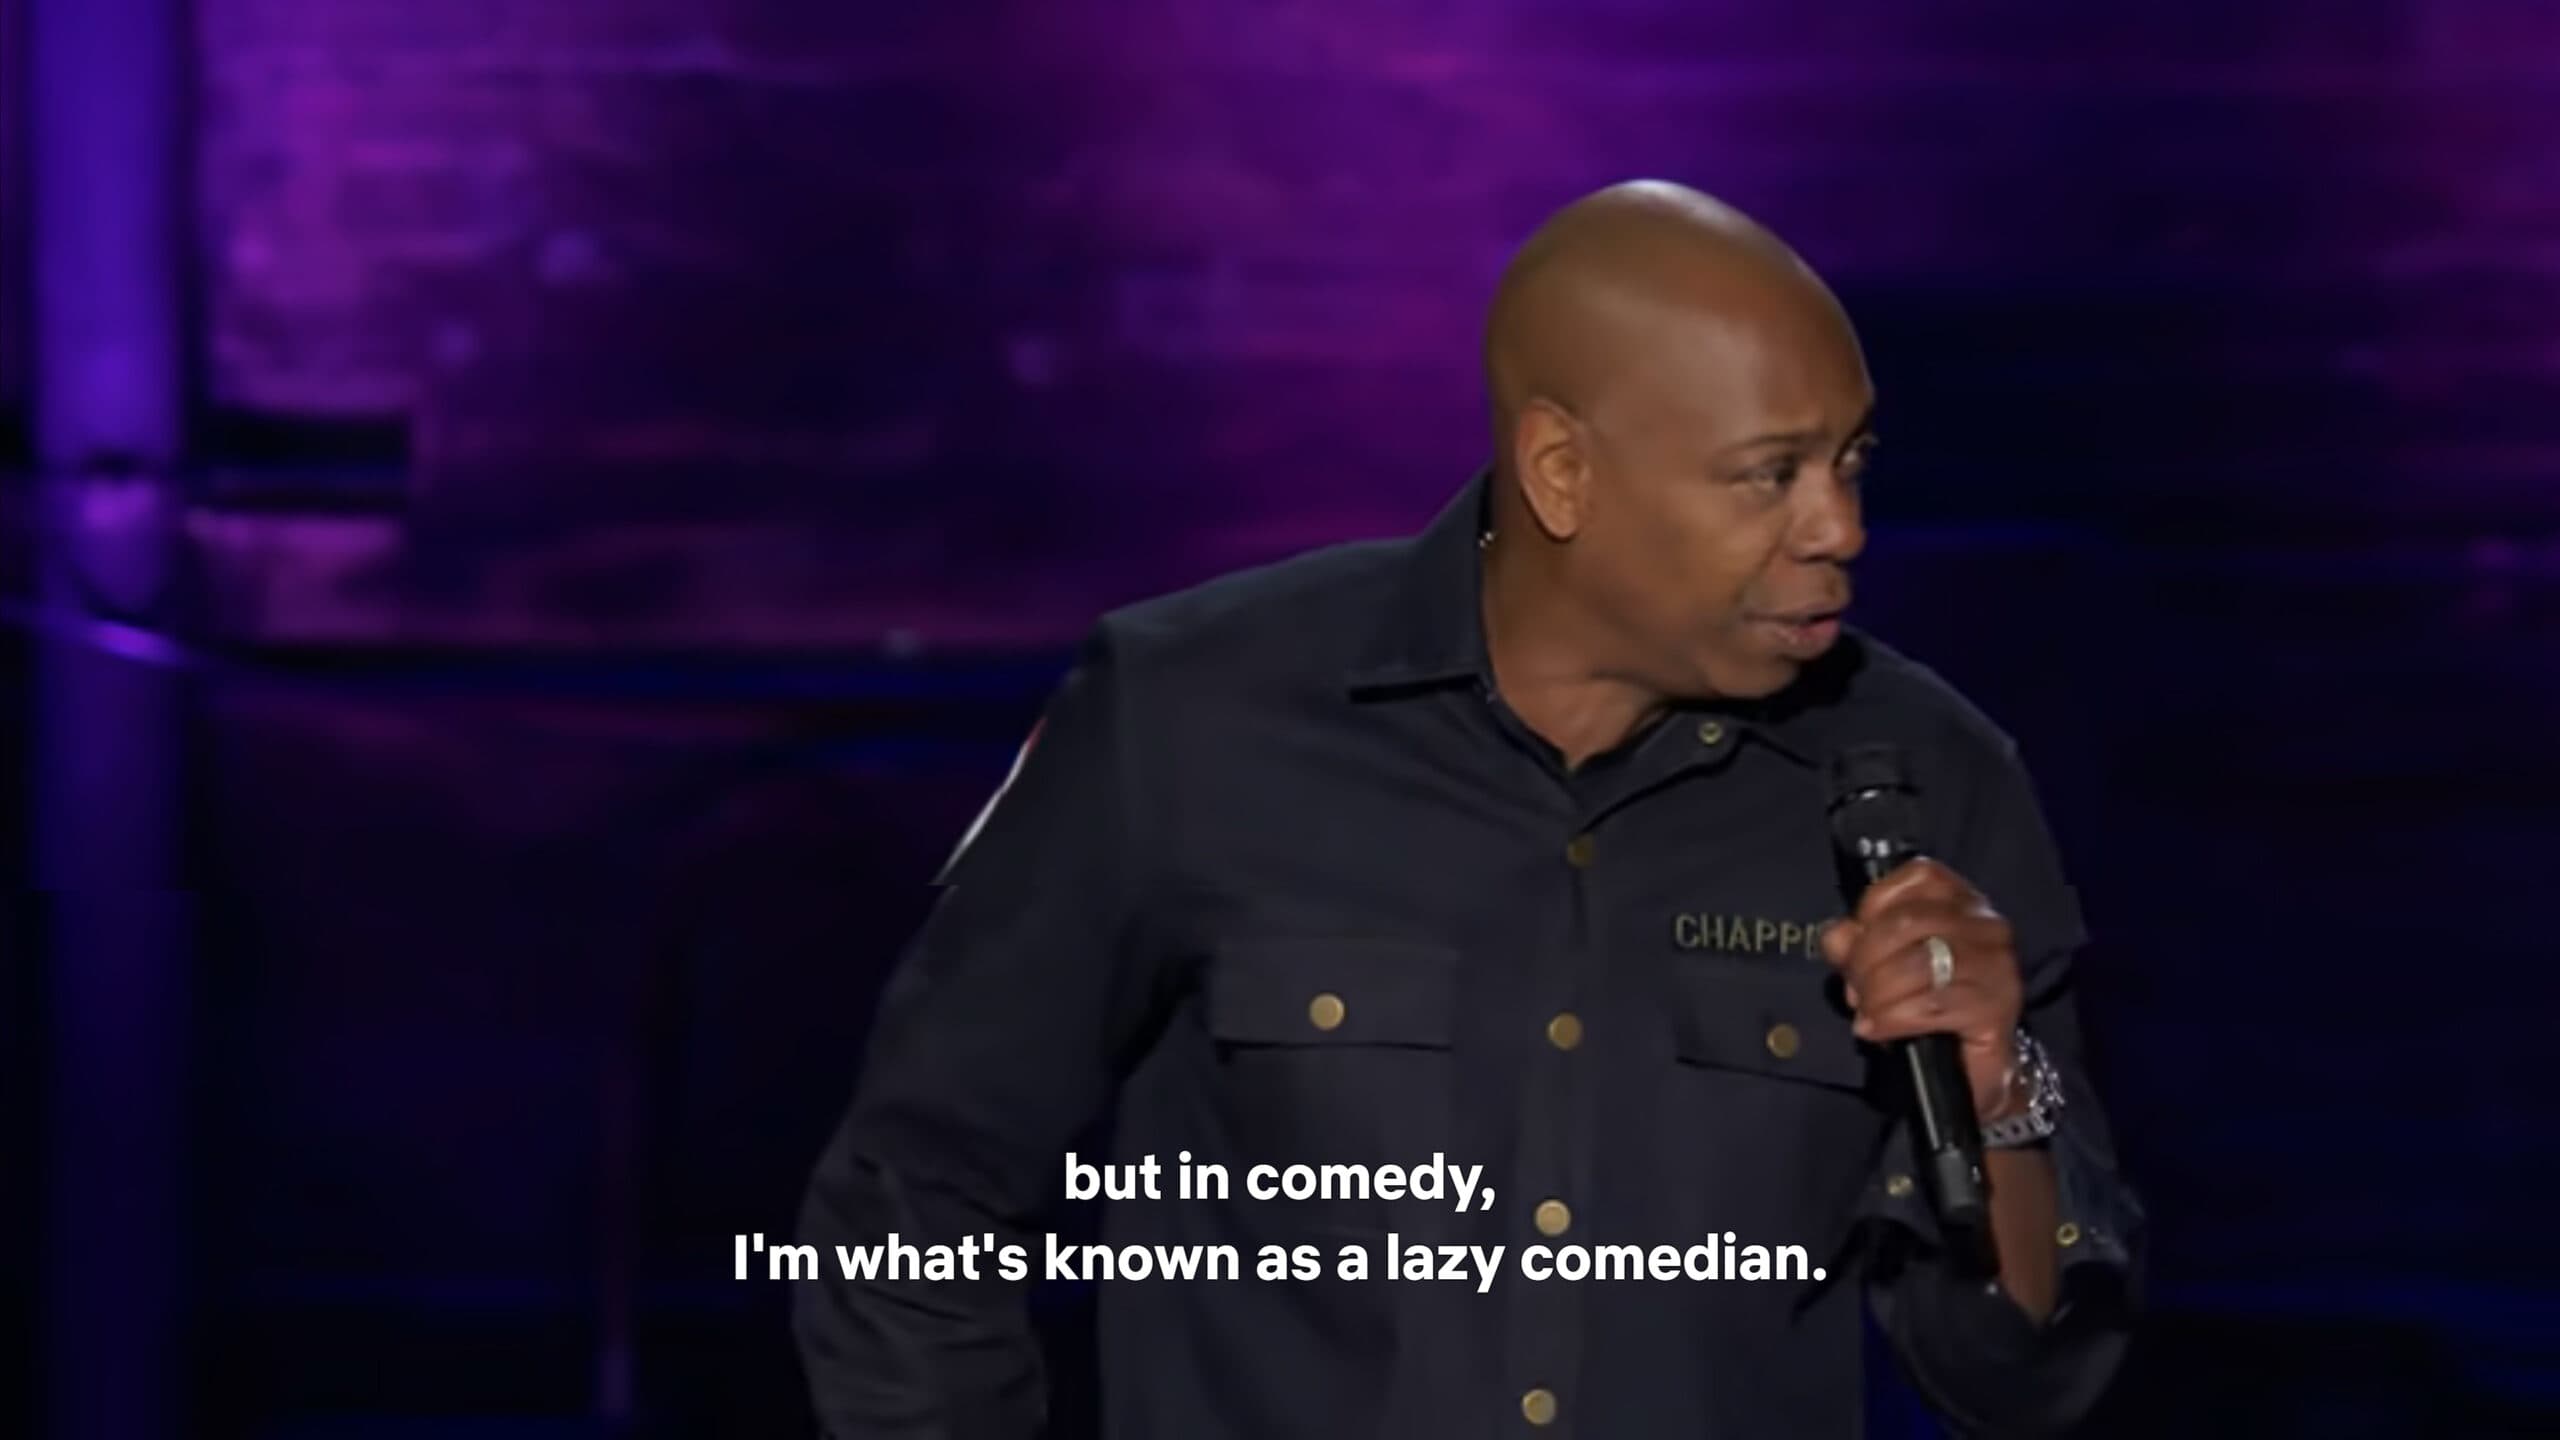 Dave Chappelle acknowledging being called a lazy comedian.